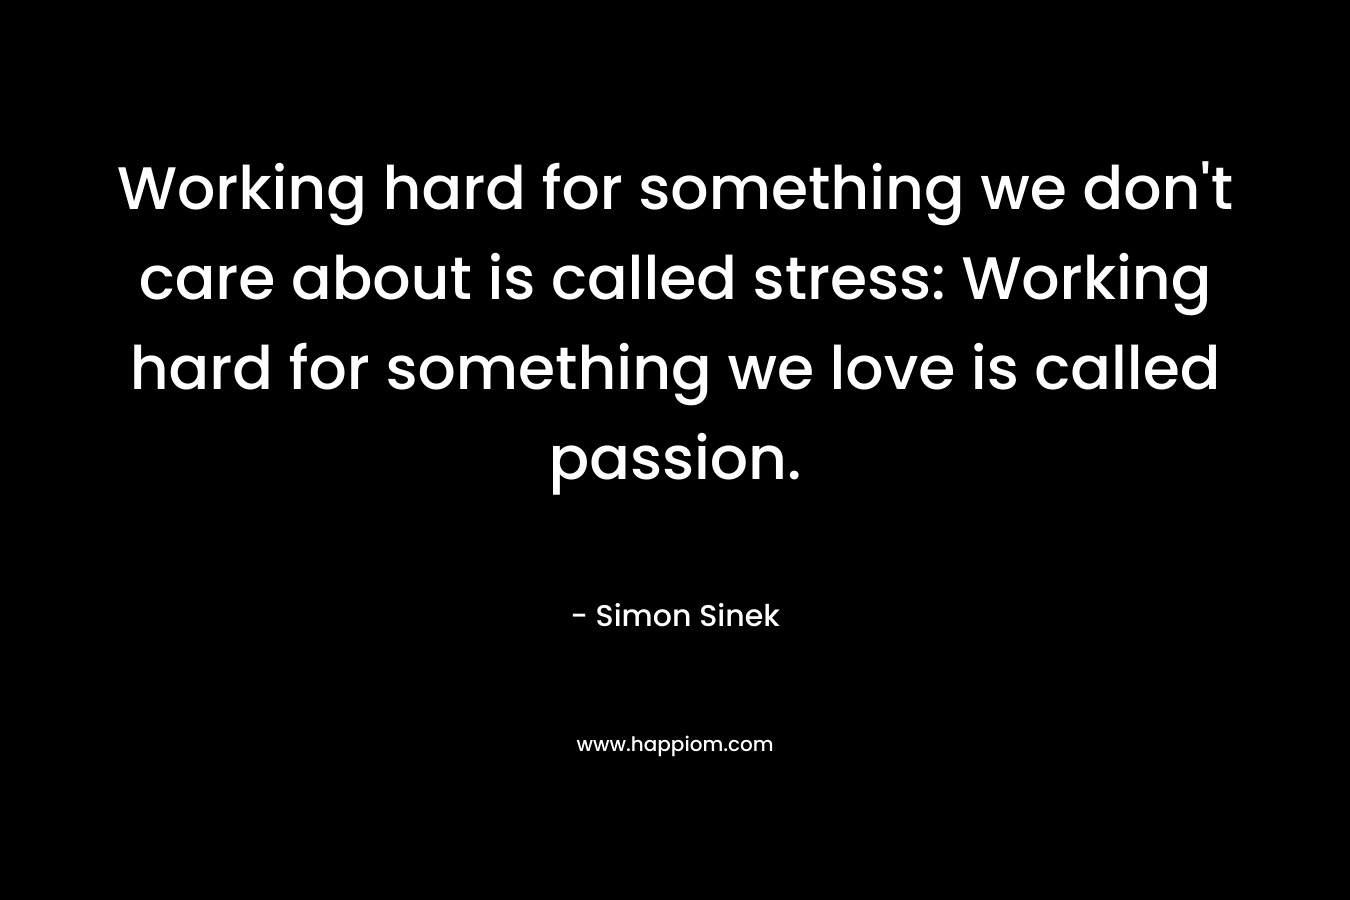 Working hard for something we don’t care about is called stress: Working hard for something we love is called passion. – Simon Sinek